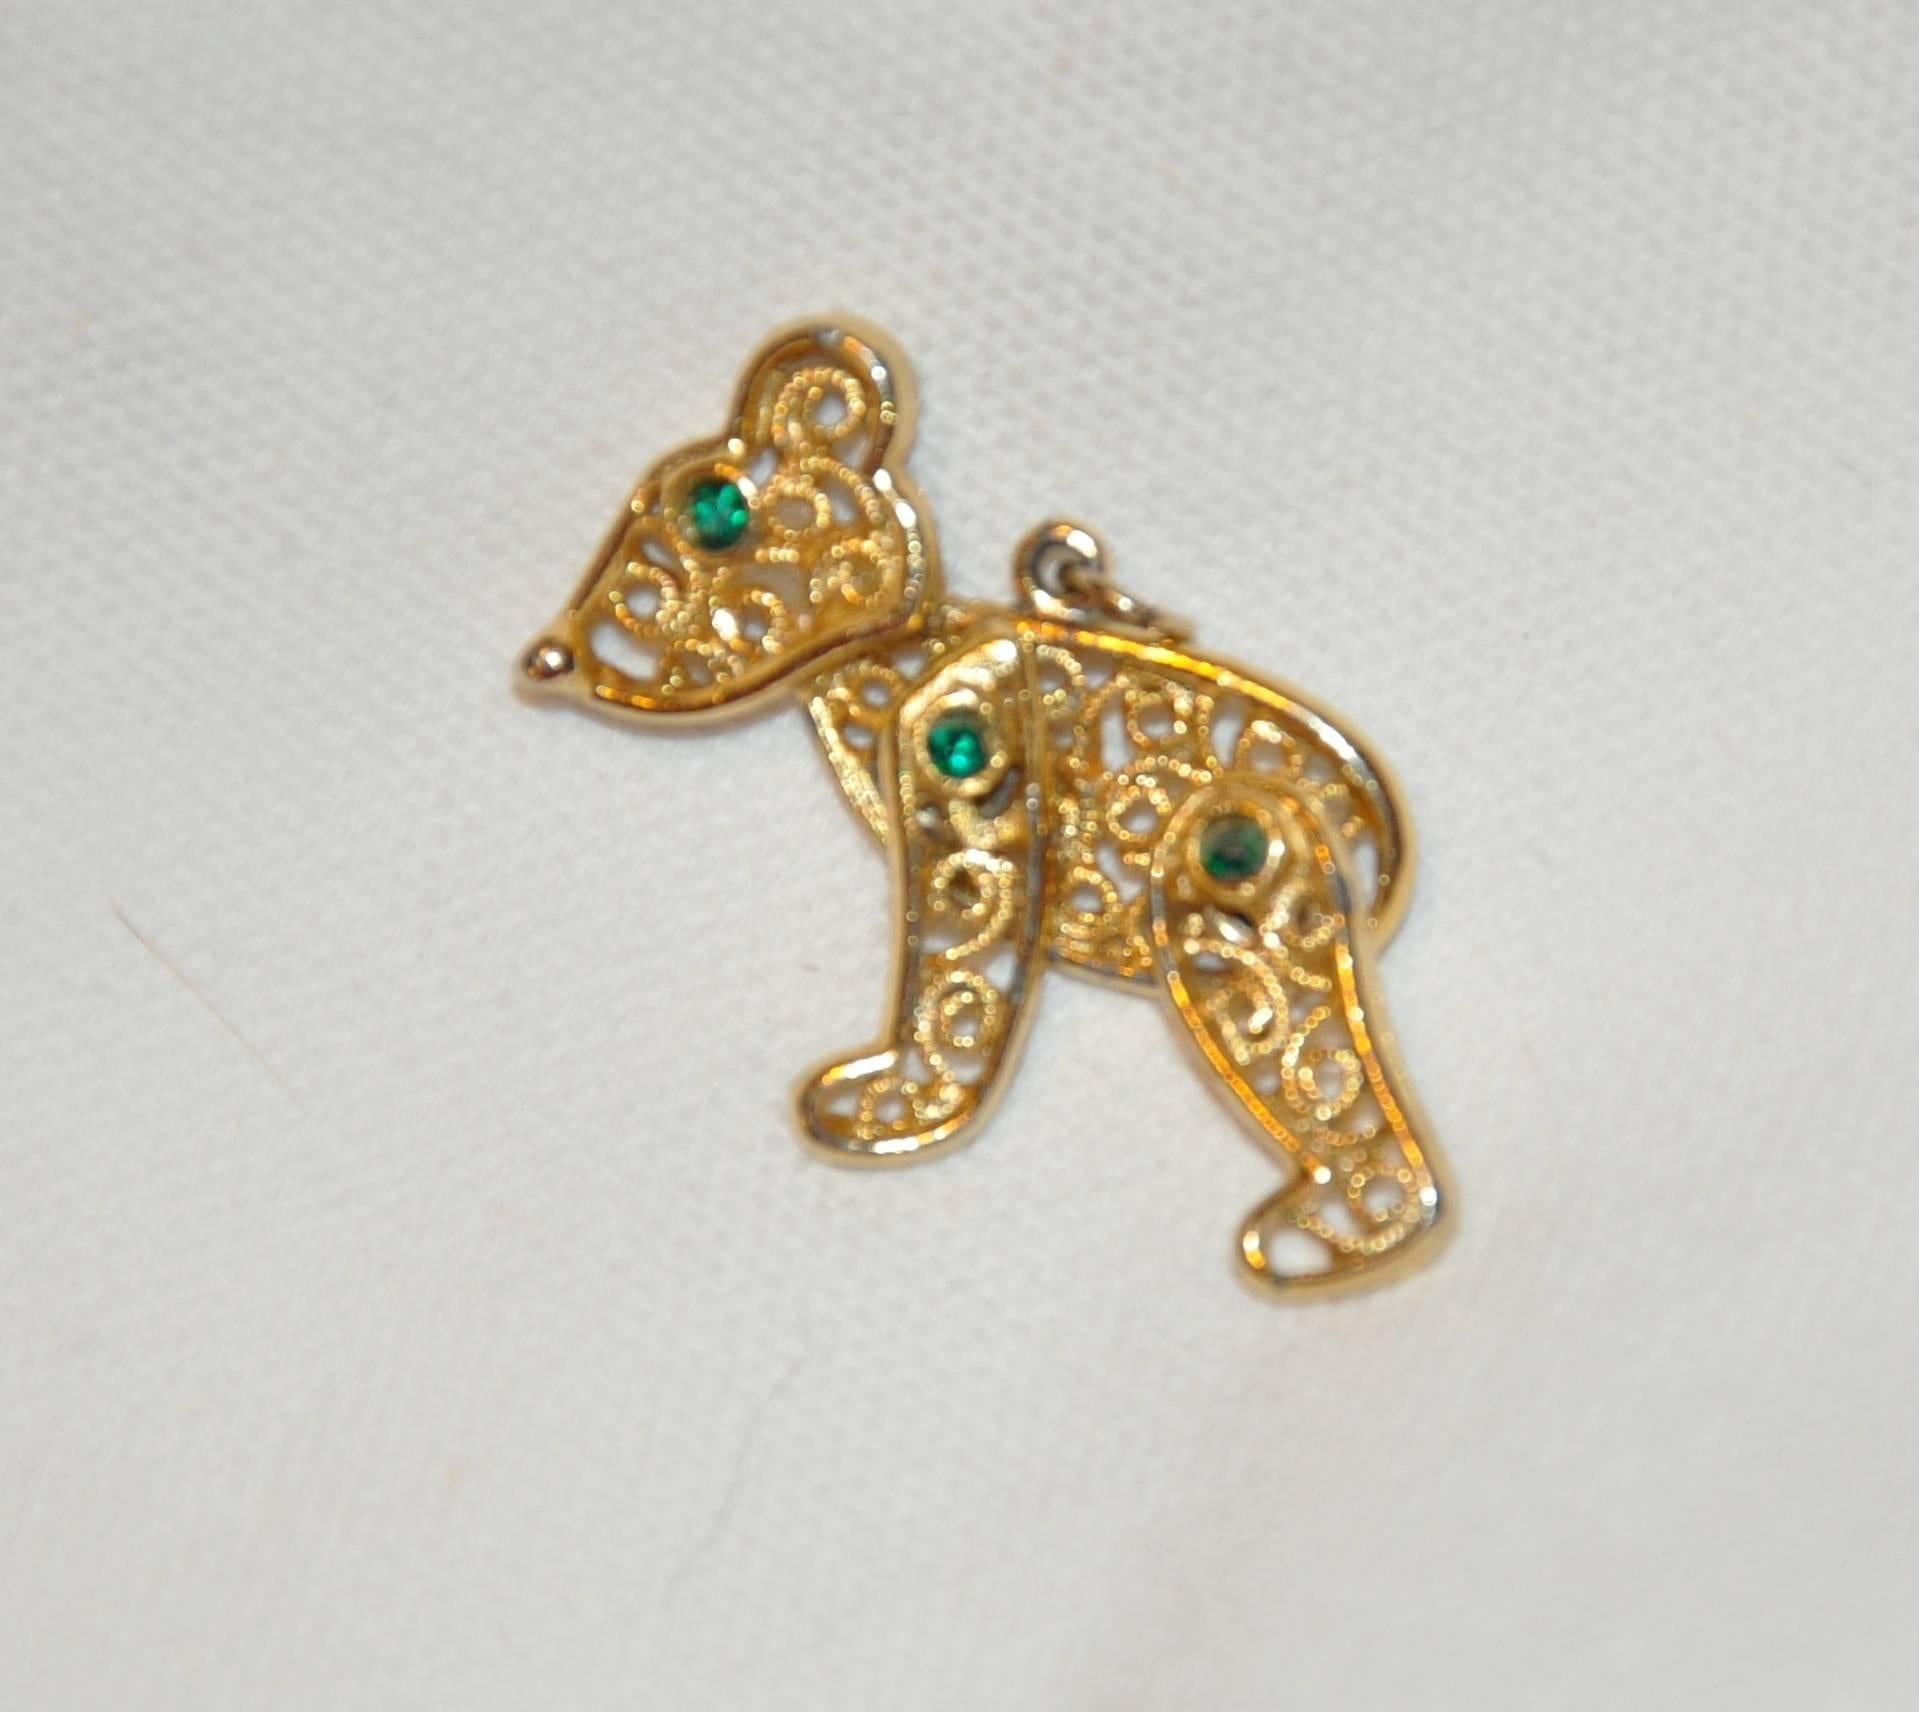        This wonderfully whimsical moveable "Teddy" pendant in gilded gold hardware accented with faux emerald eyes accented with filagree detailing measures 1 1/2 inches by 1 1/2 inches.